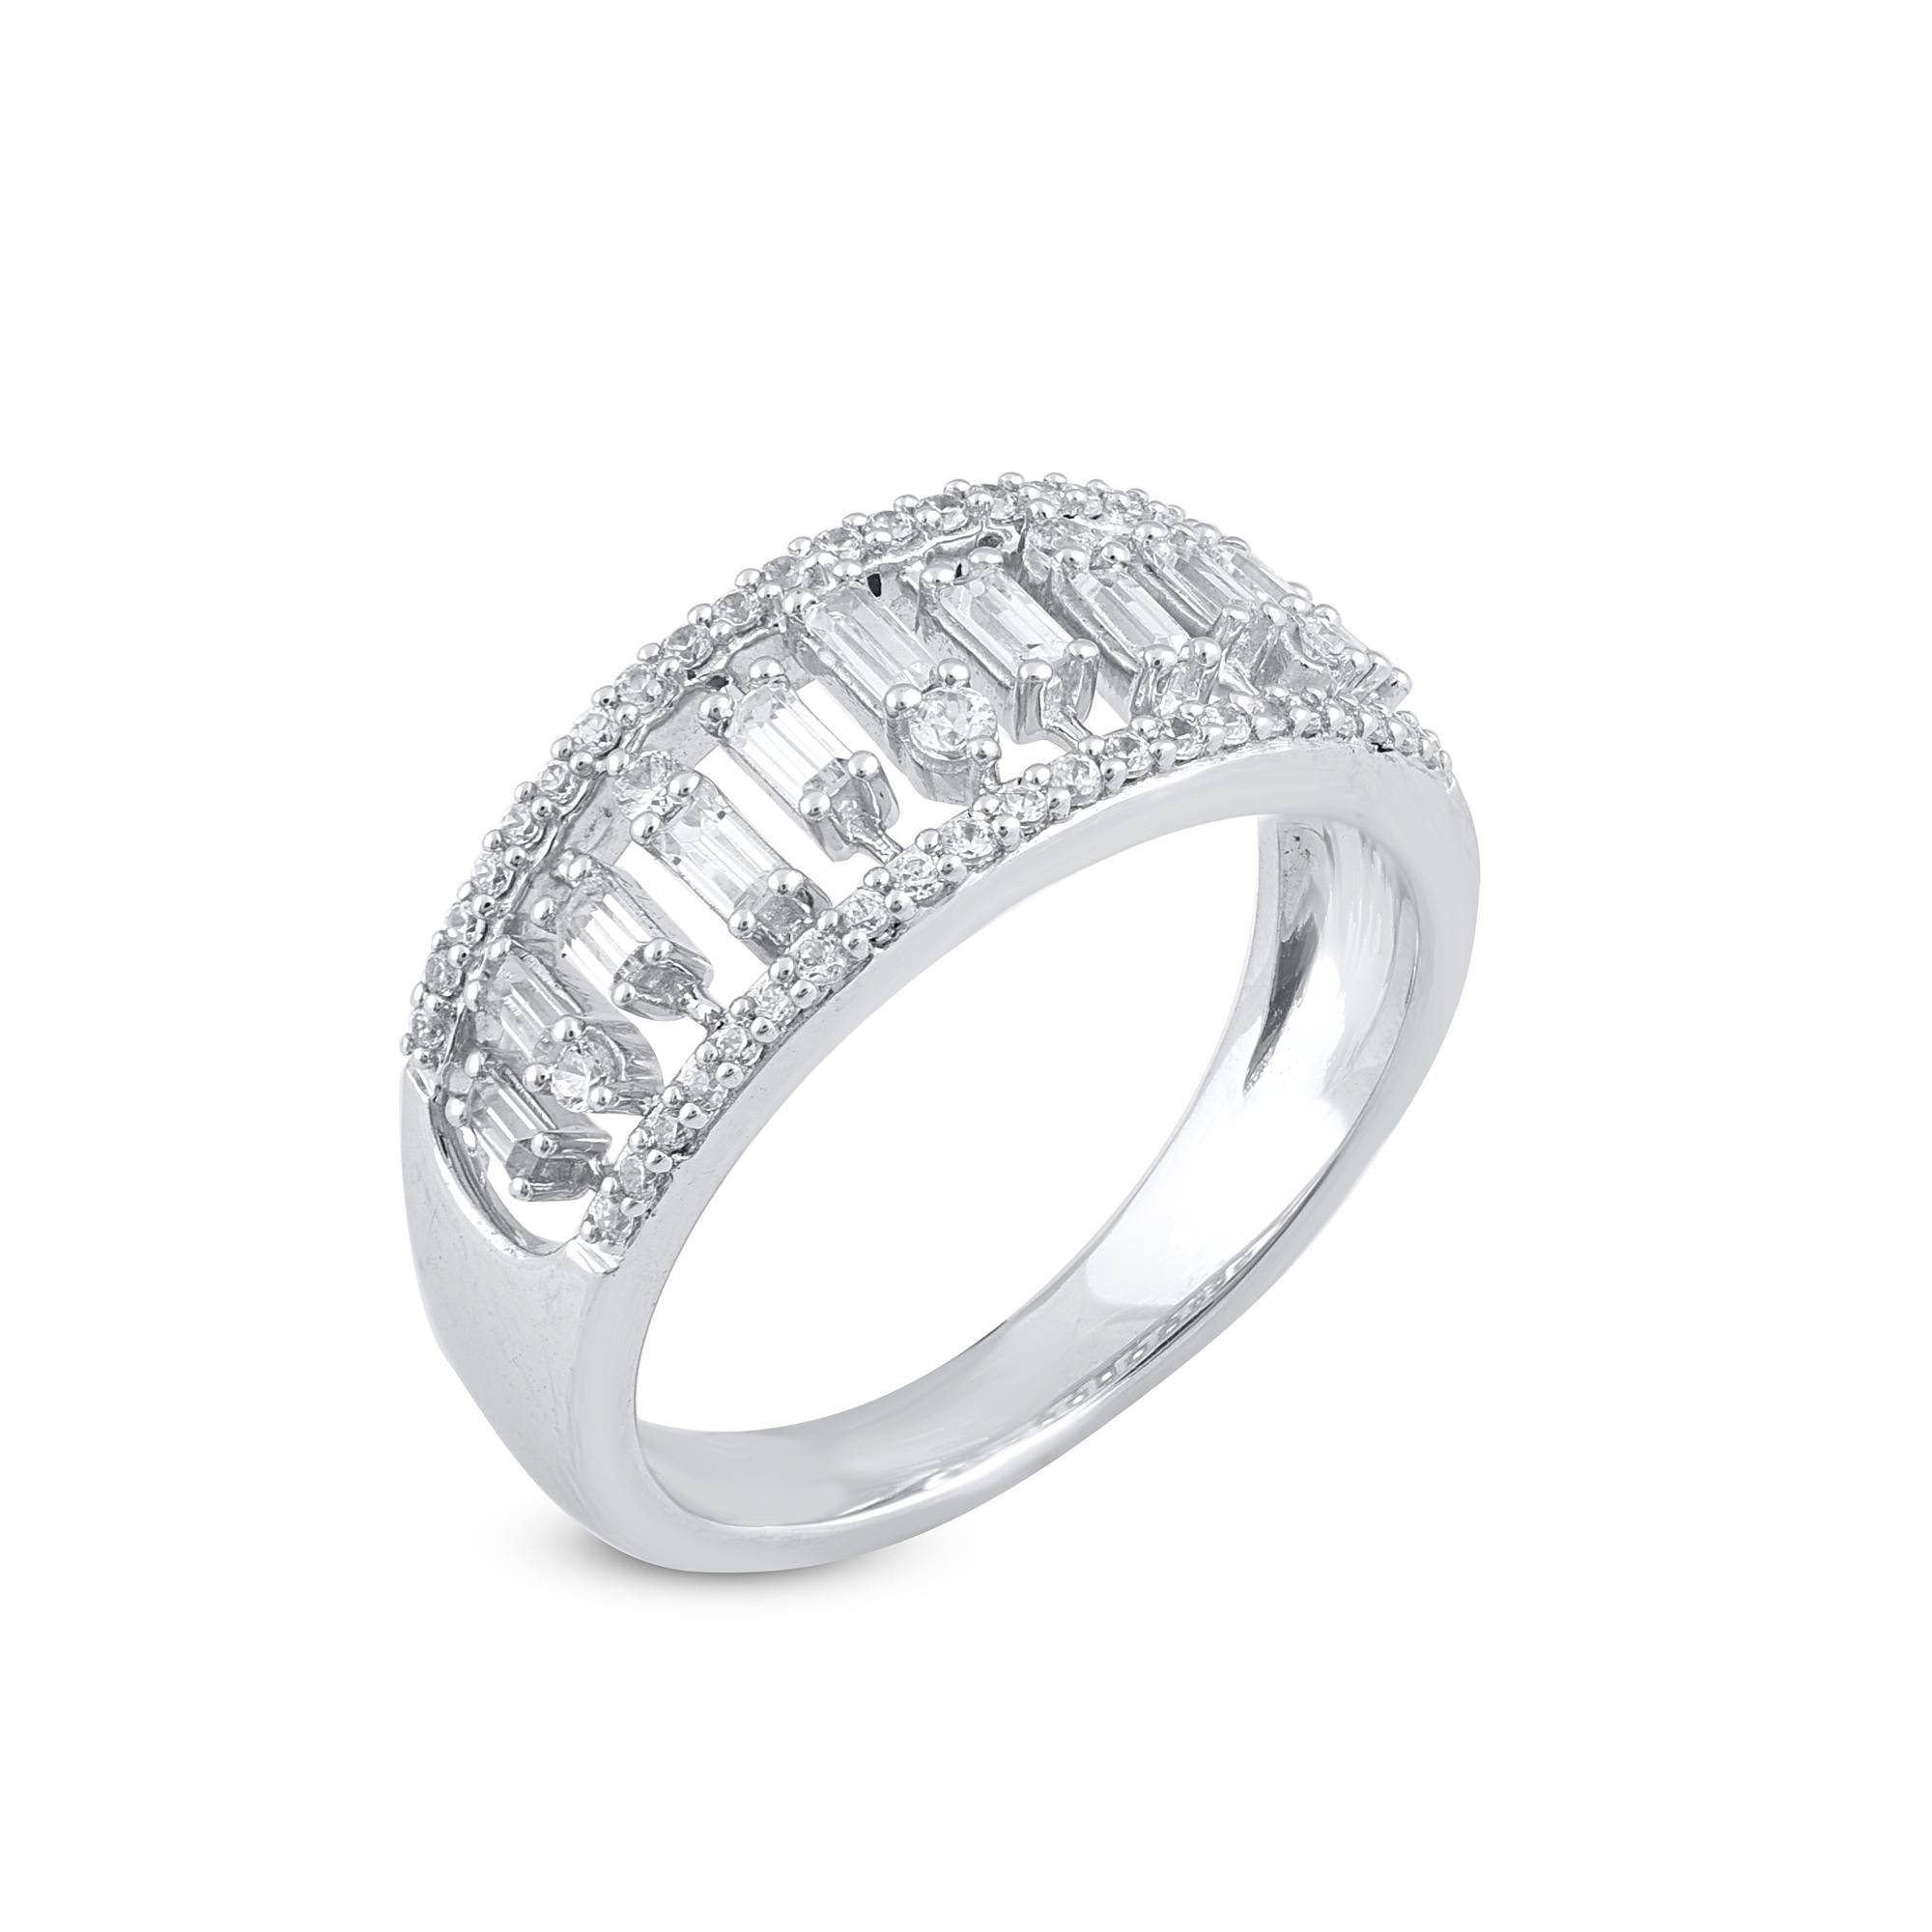 A bright and beautiful choice for any occasion, this sparkling diamond wedding band gives her a moment to remember. The ring is crafted from 14-karat gold in your choice of white, rose, or yellow, and features Round Brilliant 47 and Baguette - 11